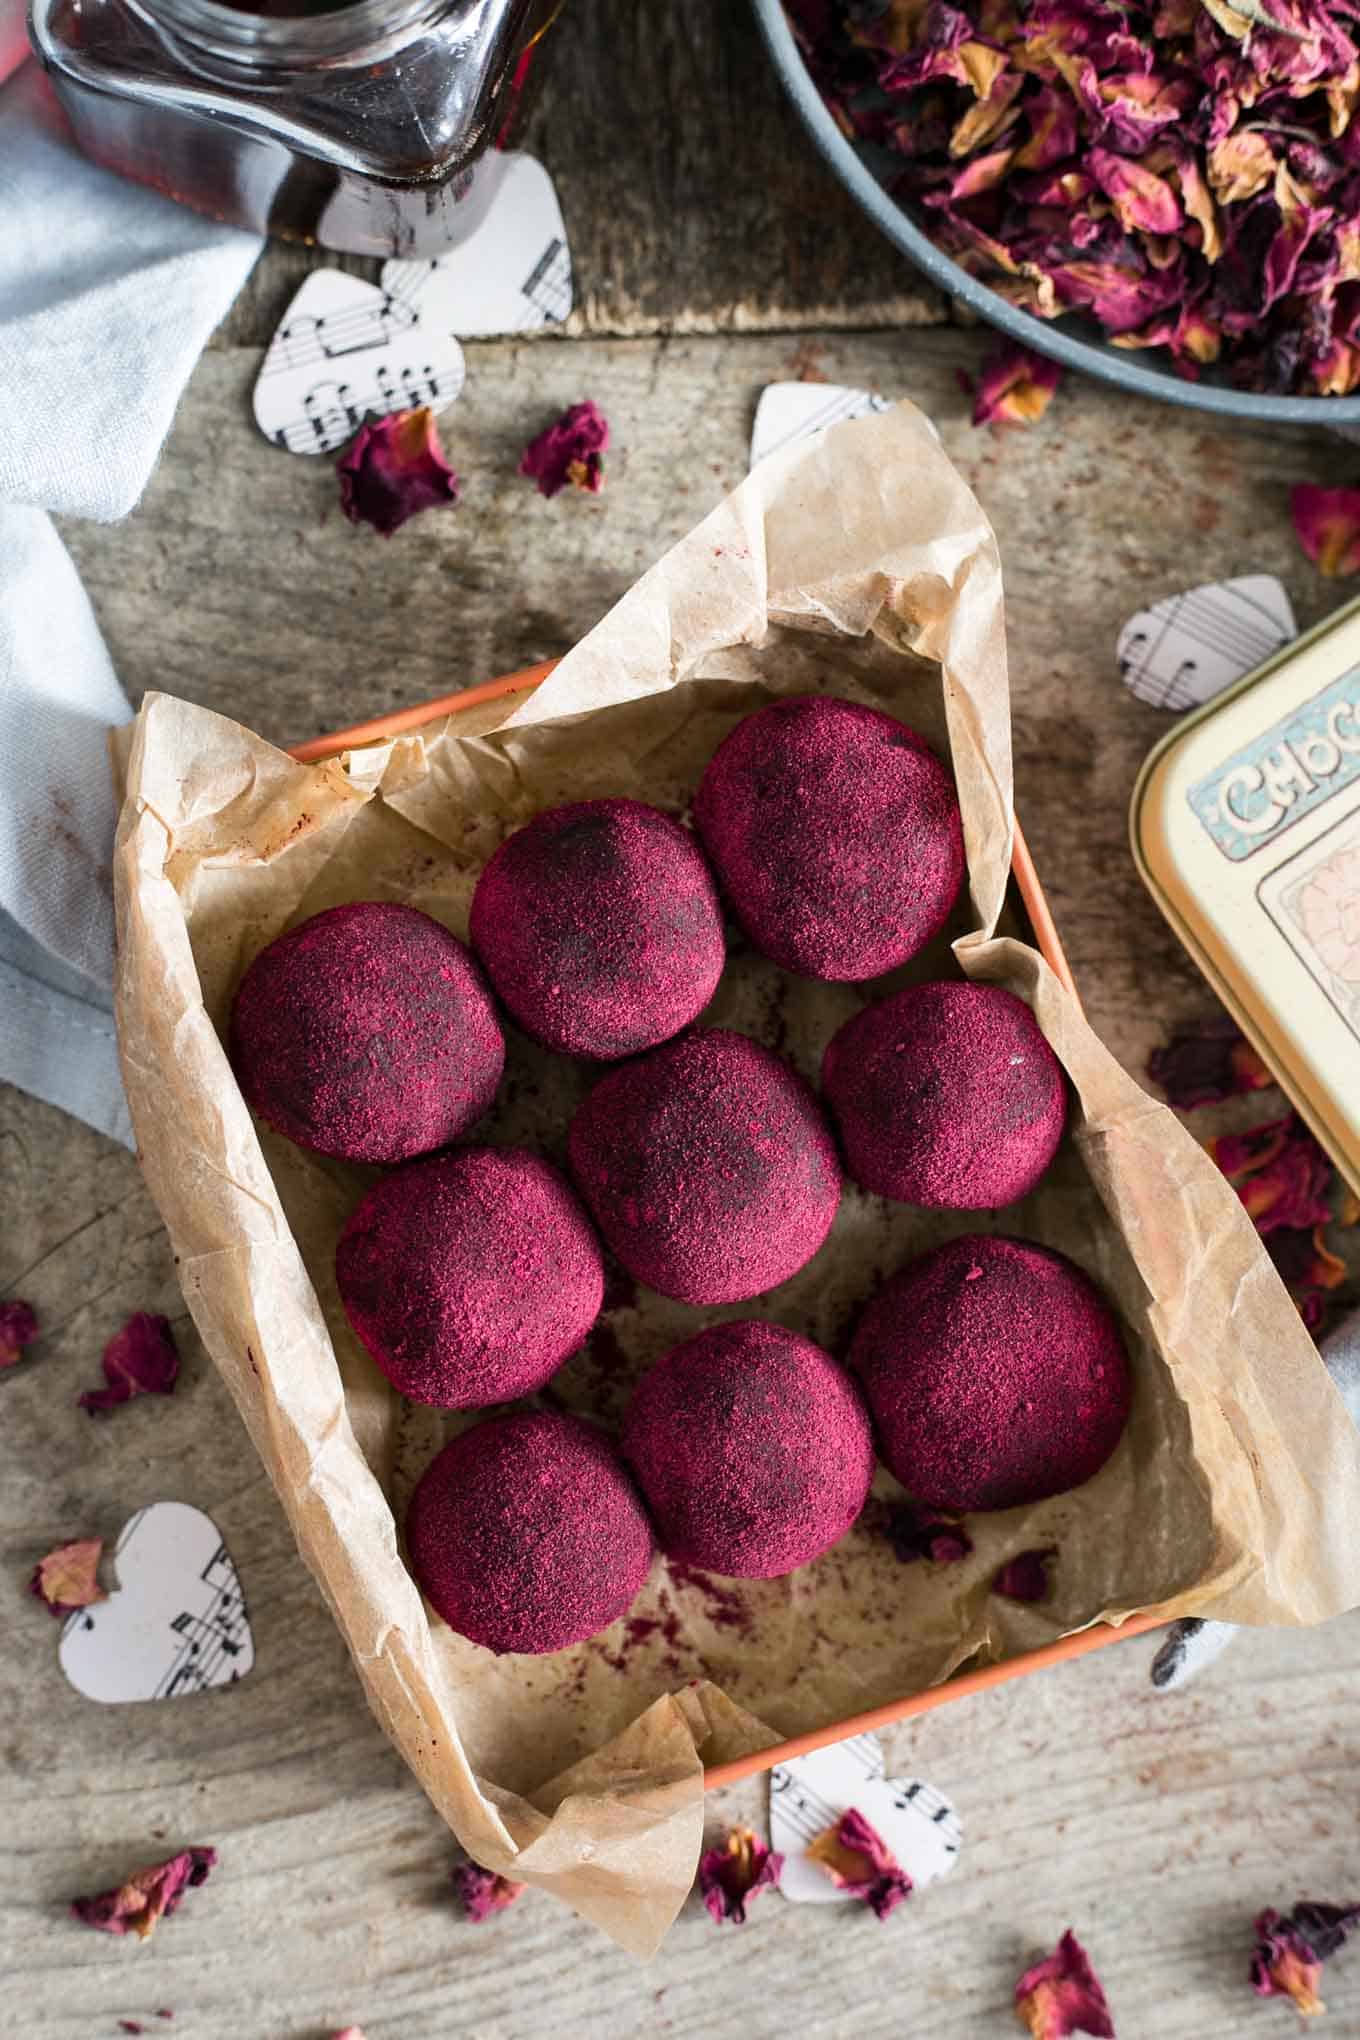 Delicious chocolate and peanut butter truffles. Great as a Valentine's gift for the loved ones! #vegan #truffles #healthysnack | via @annabanana.co